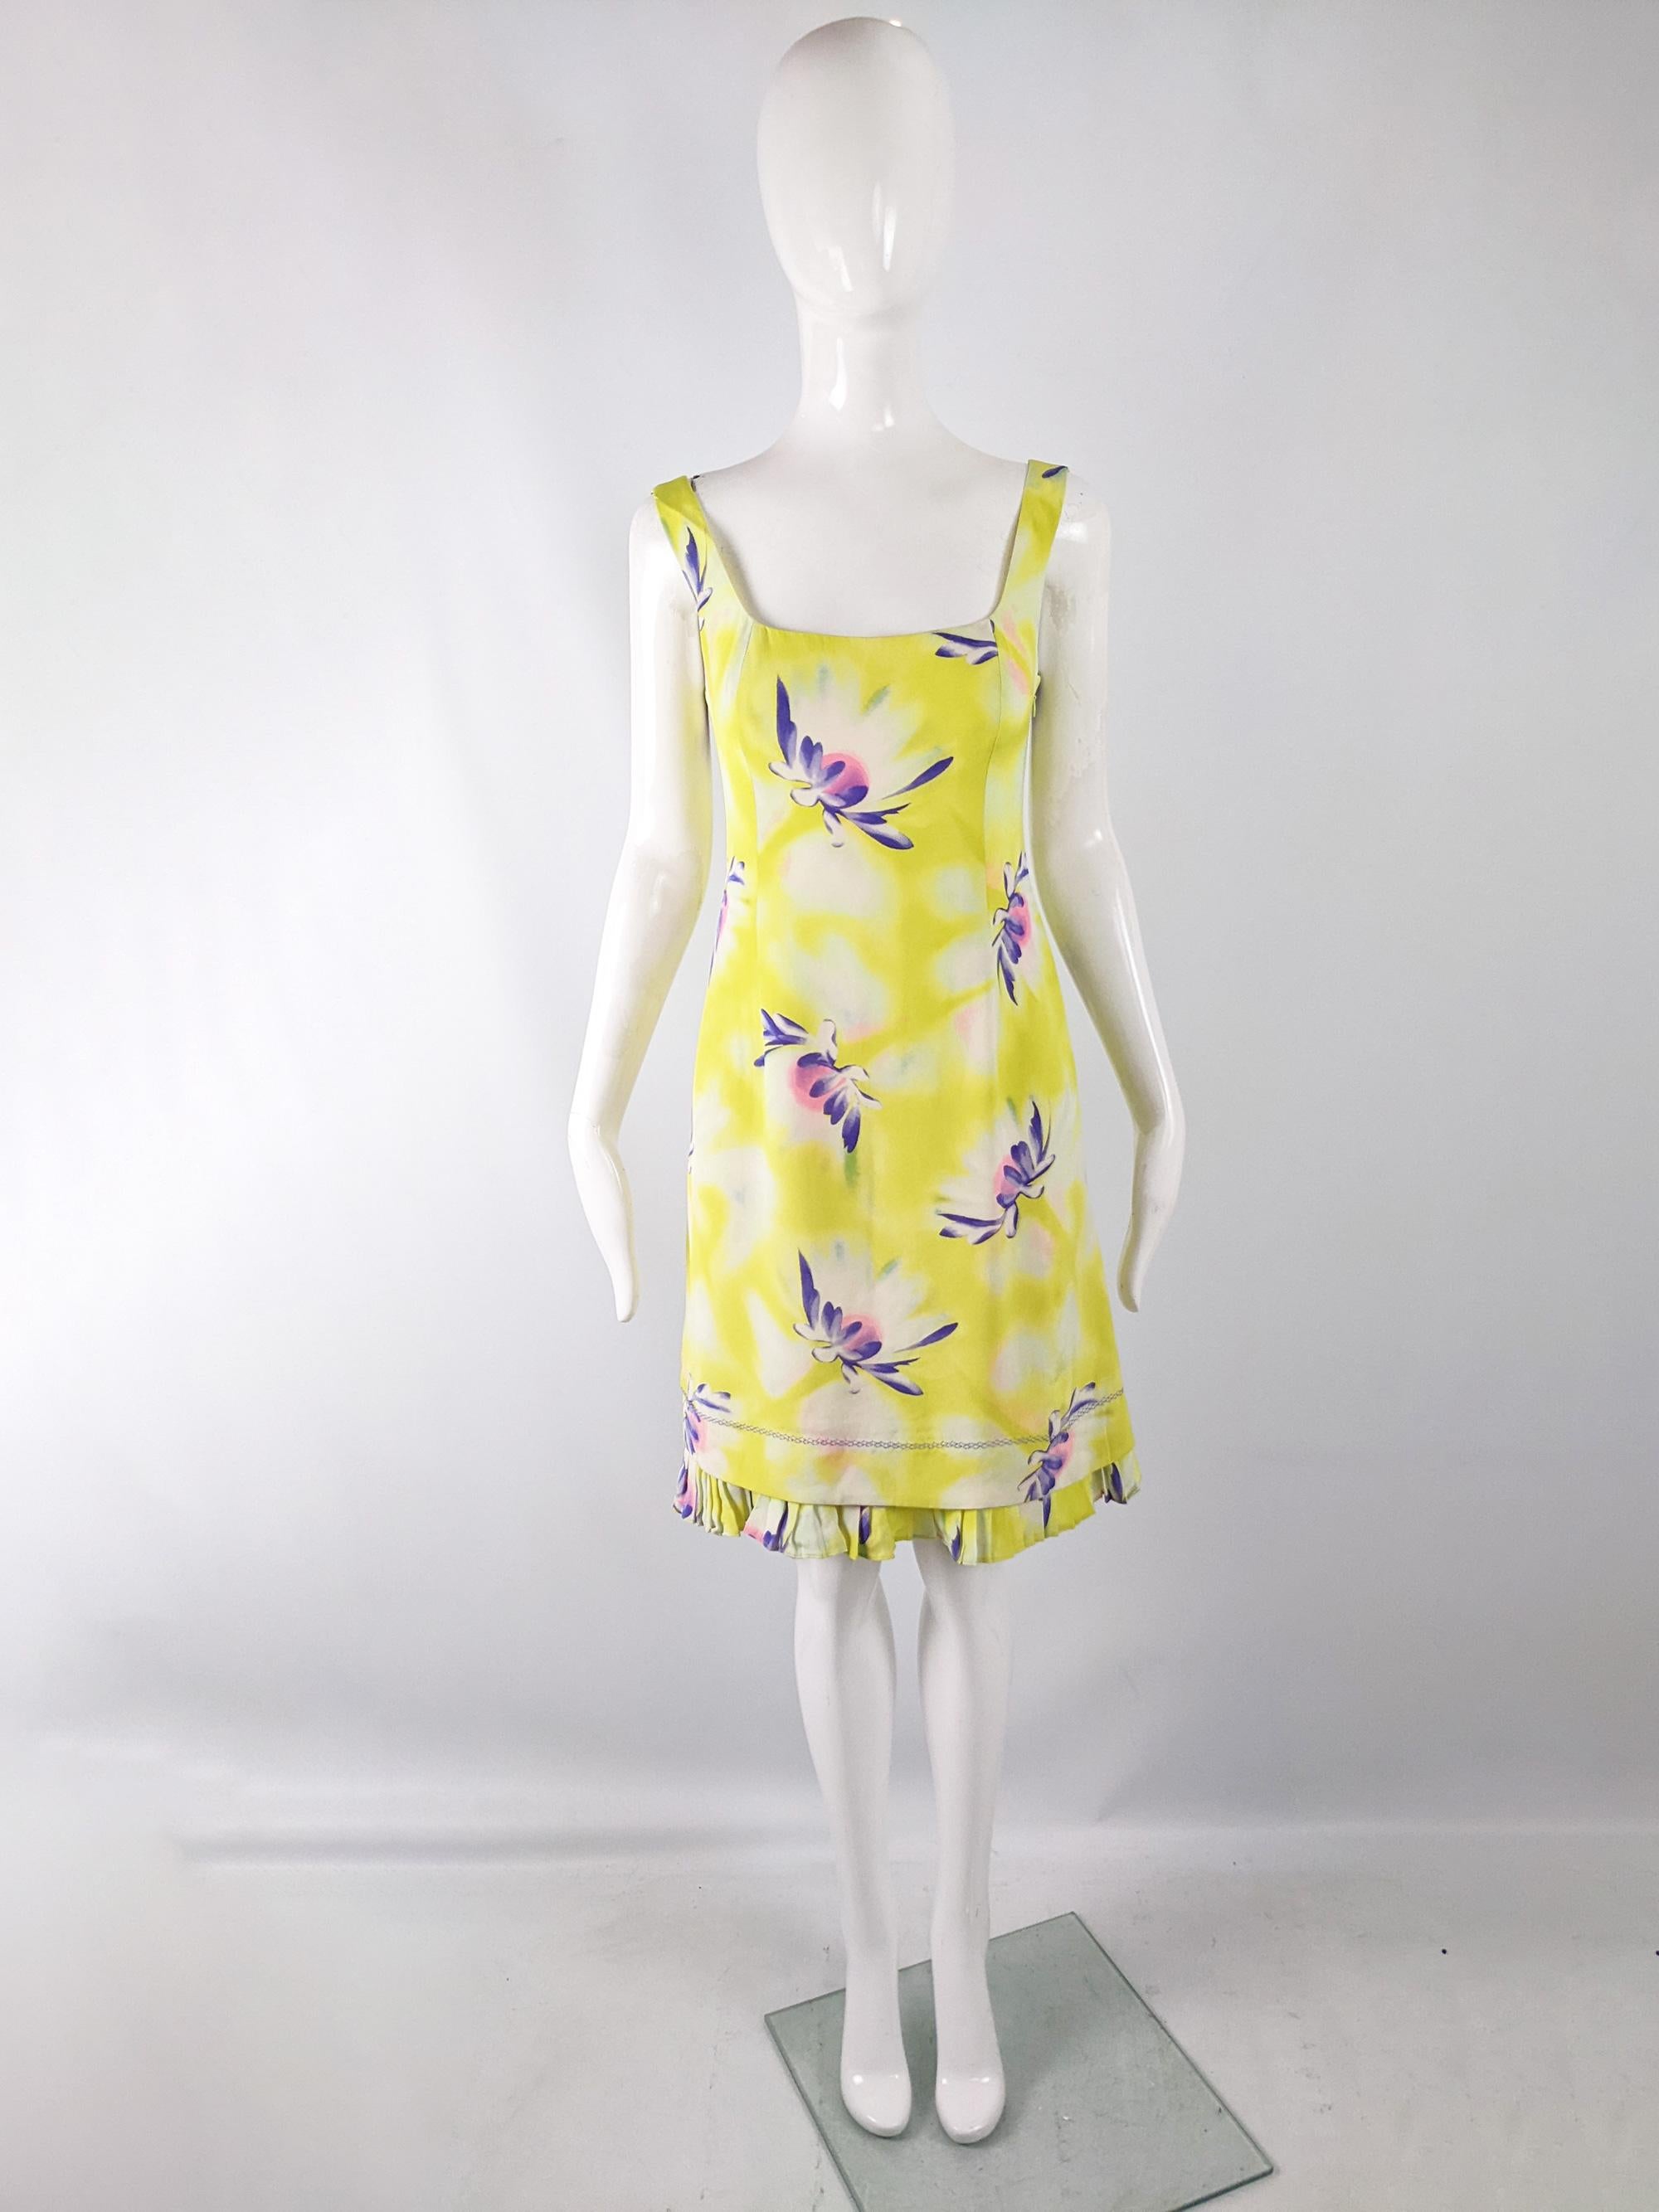 A fabulous vintage womens dress from the 90s (most likely the Spring 1996 collection) by luxury Italian fashion designer, Gianni Versace for the Gianni Versace Couture label. In a yellow silk with a bold purple, white and pink floral pattern